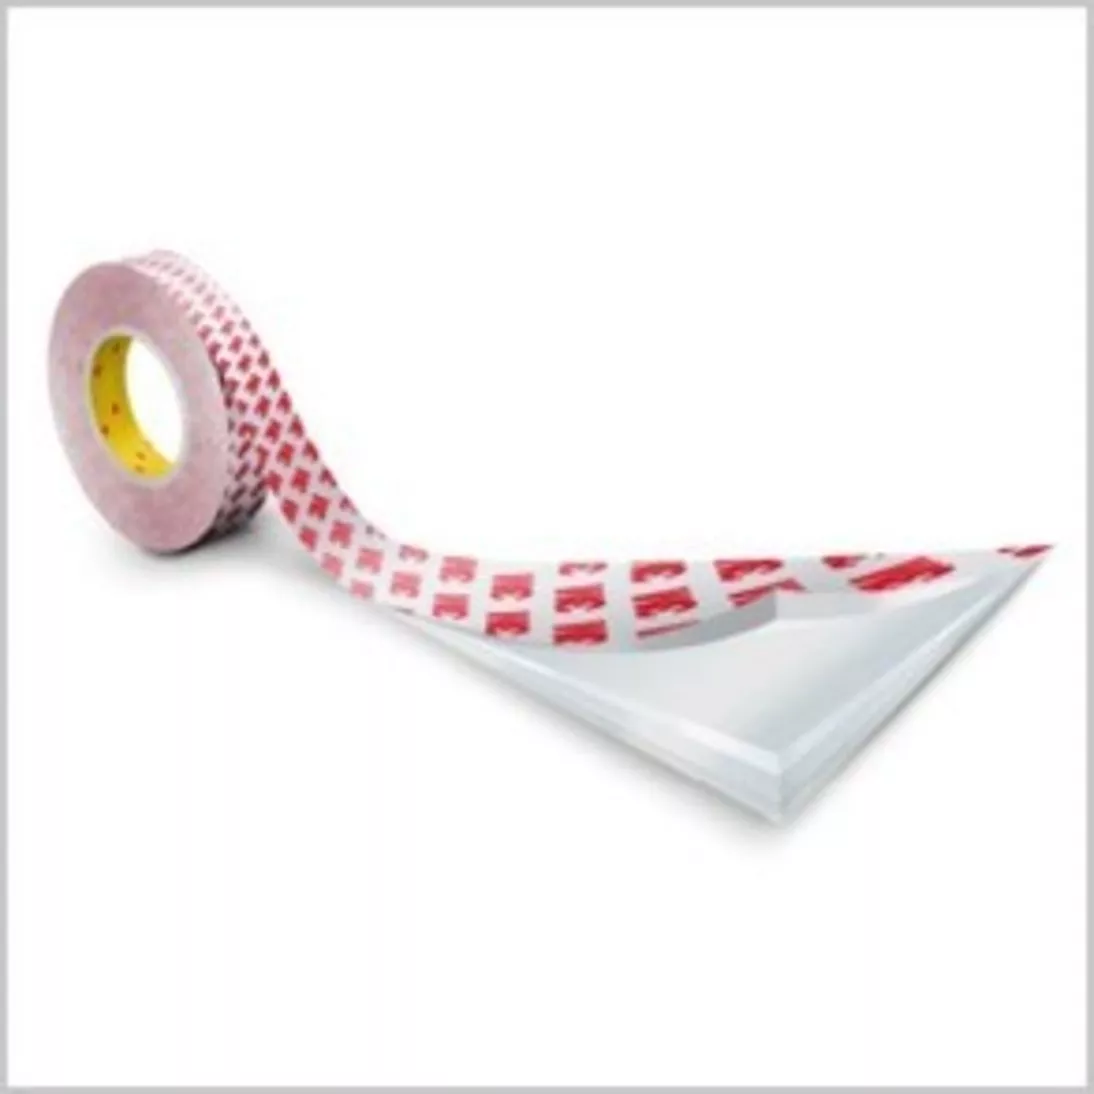 3M™ High Performance Double Coated Tape 9088-200, Clear, 19 mm x 50 m,
0.20 mm, 48 rolls per case